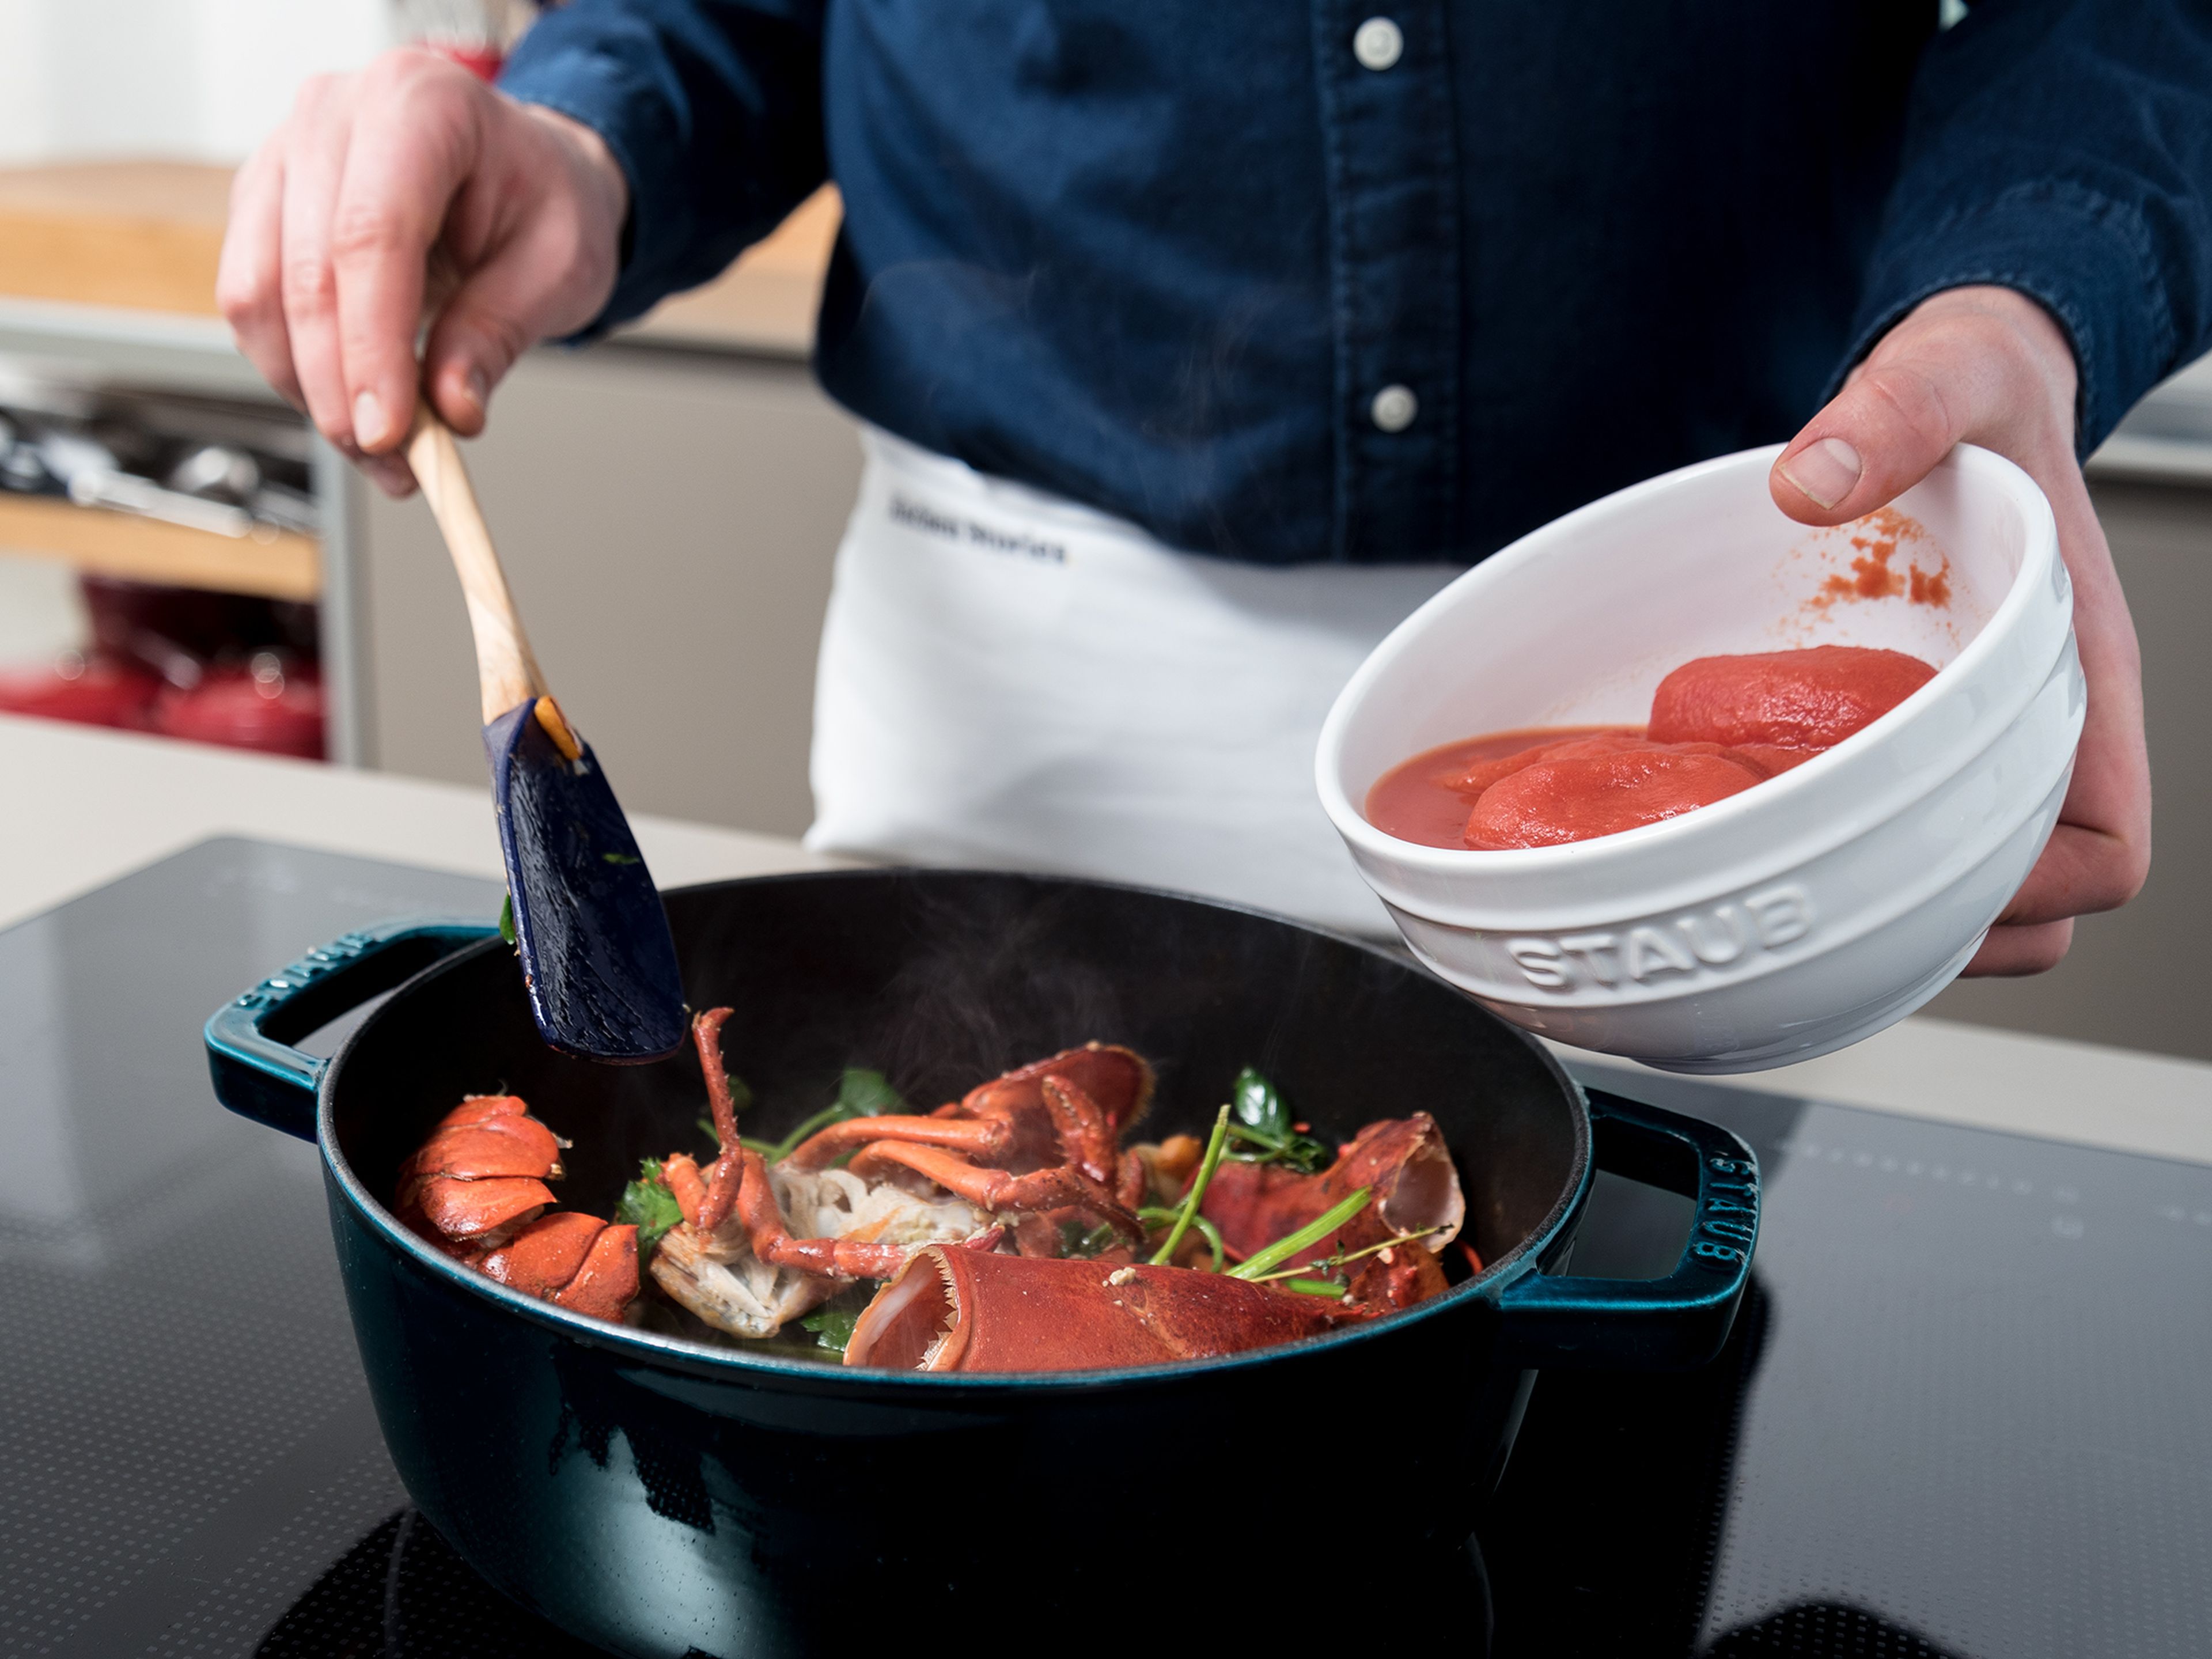 In a fresh pot or cocotte, heat half the olive oil over medium-high heat. Add the carrot, shallots, and garlic. Sauté for approx. 1 min. Stir in the lobster shells, thyme, bay leaf, parsley, and tomato paste. Add the tomatoes and wine and season with Piment d'Espelette, salt, and pepper. Cover and cook for approx. 20 min. over medium heat. Stir in the sour cream and reserved roe, should you have had a female lobster. Reserve and rinse lobster head and tail for plating. Salt to taste.